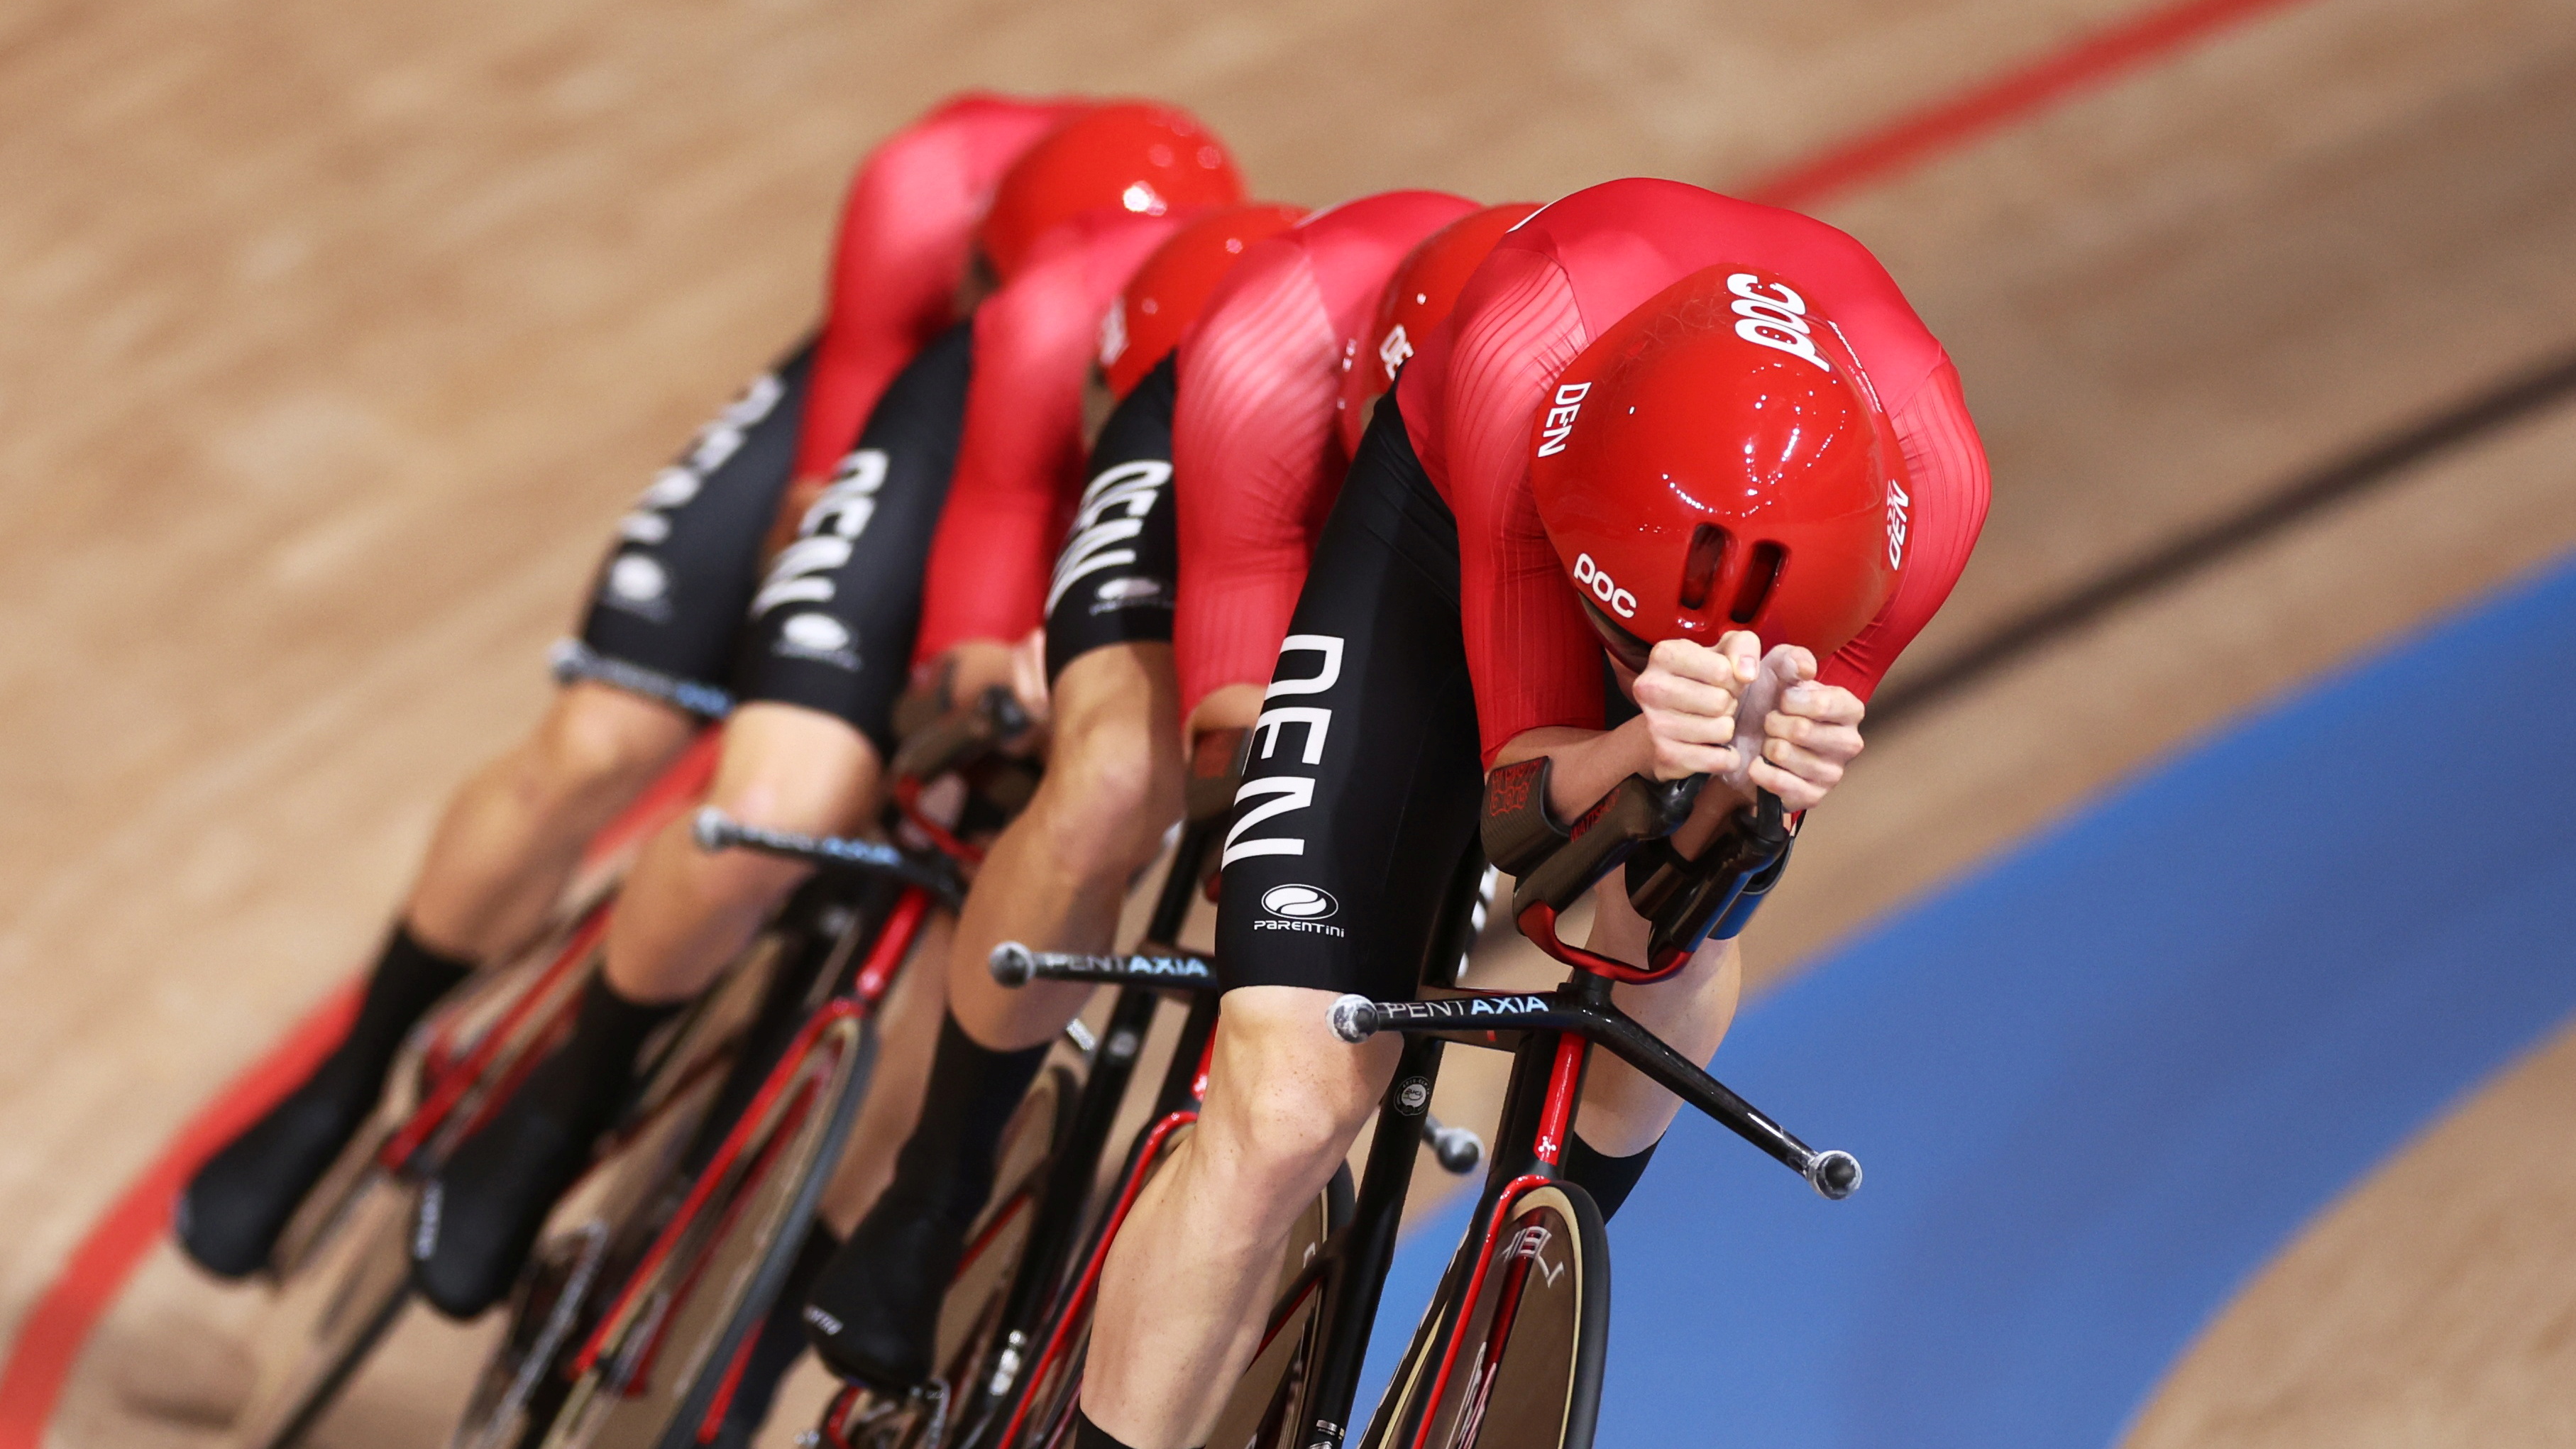 Cycling-Chaos intrigue Denmark end British men's team | Reuters